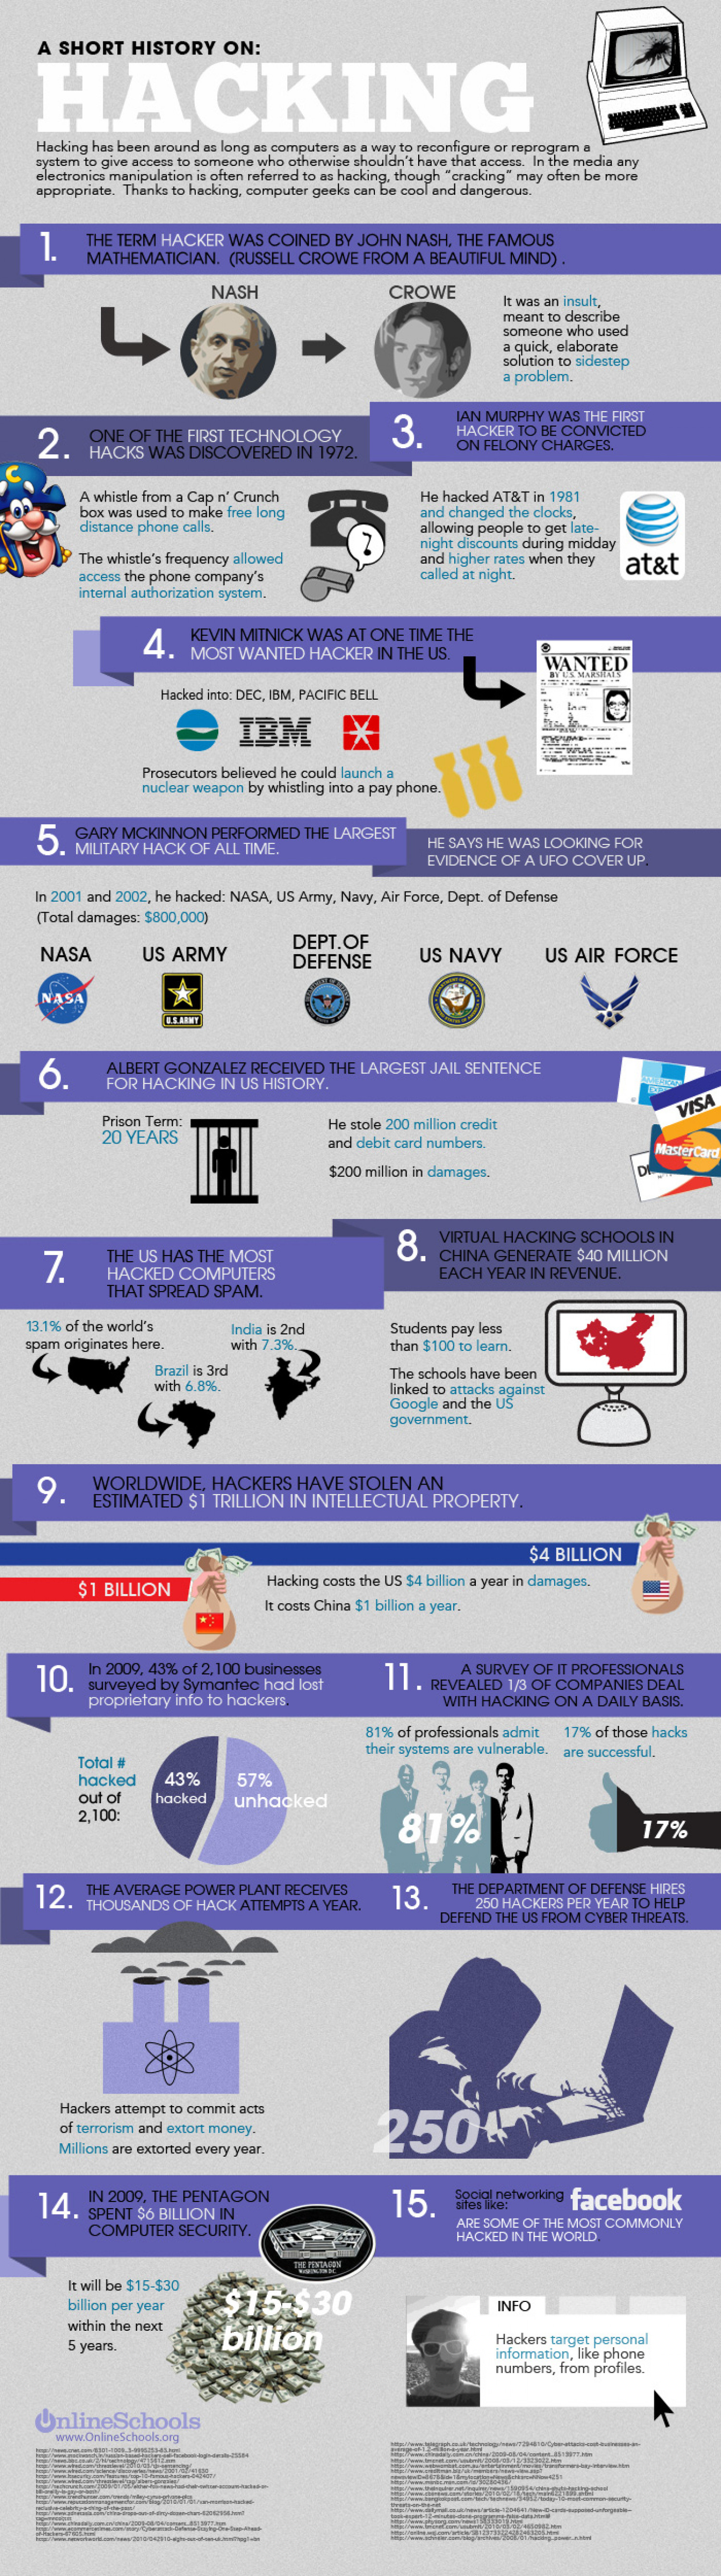 A Short Story On: Hacking Infographic